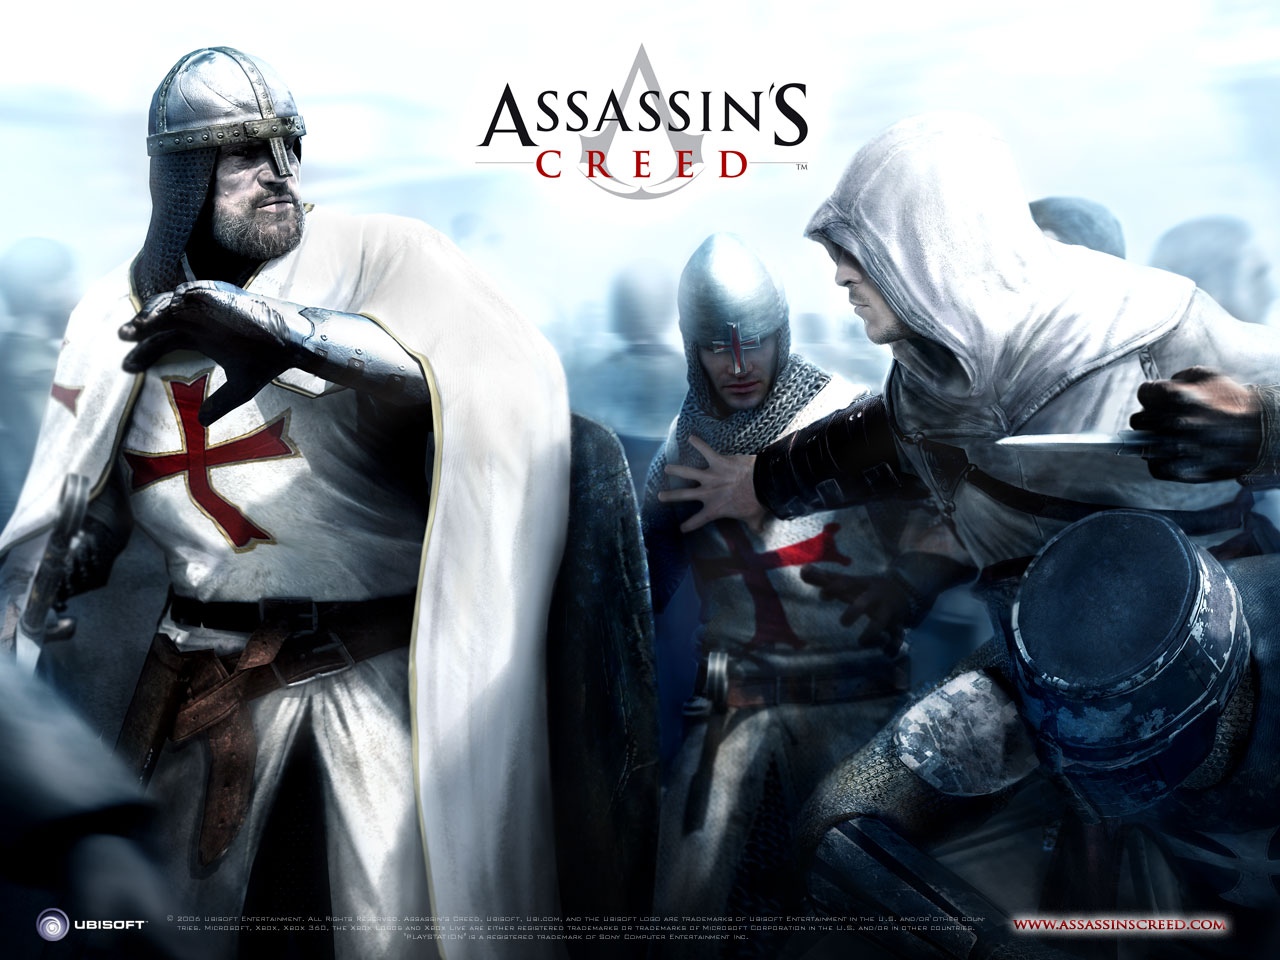 Assassins creed wallpapers